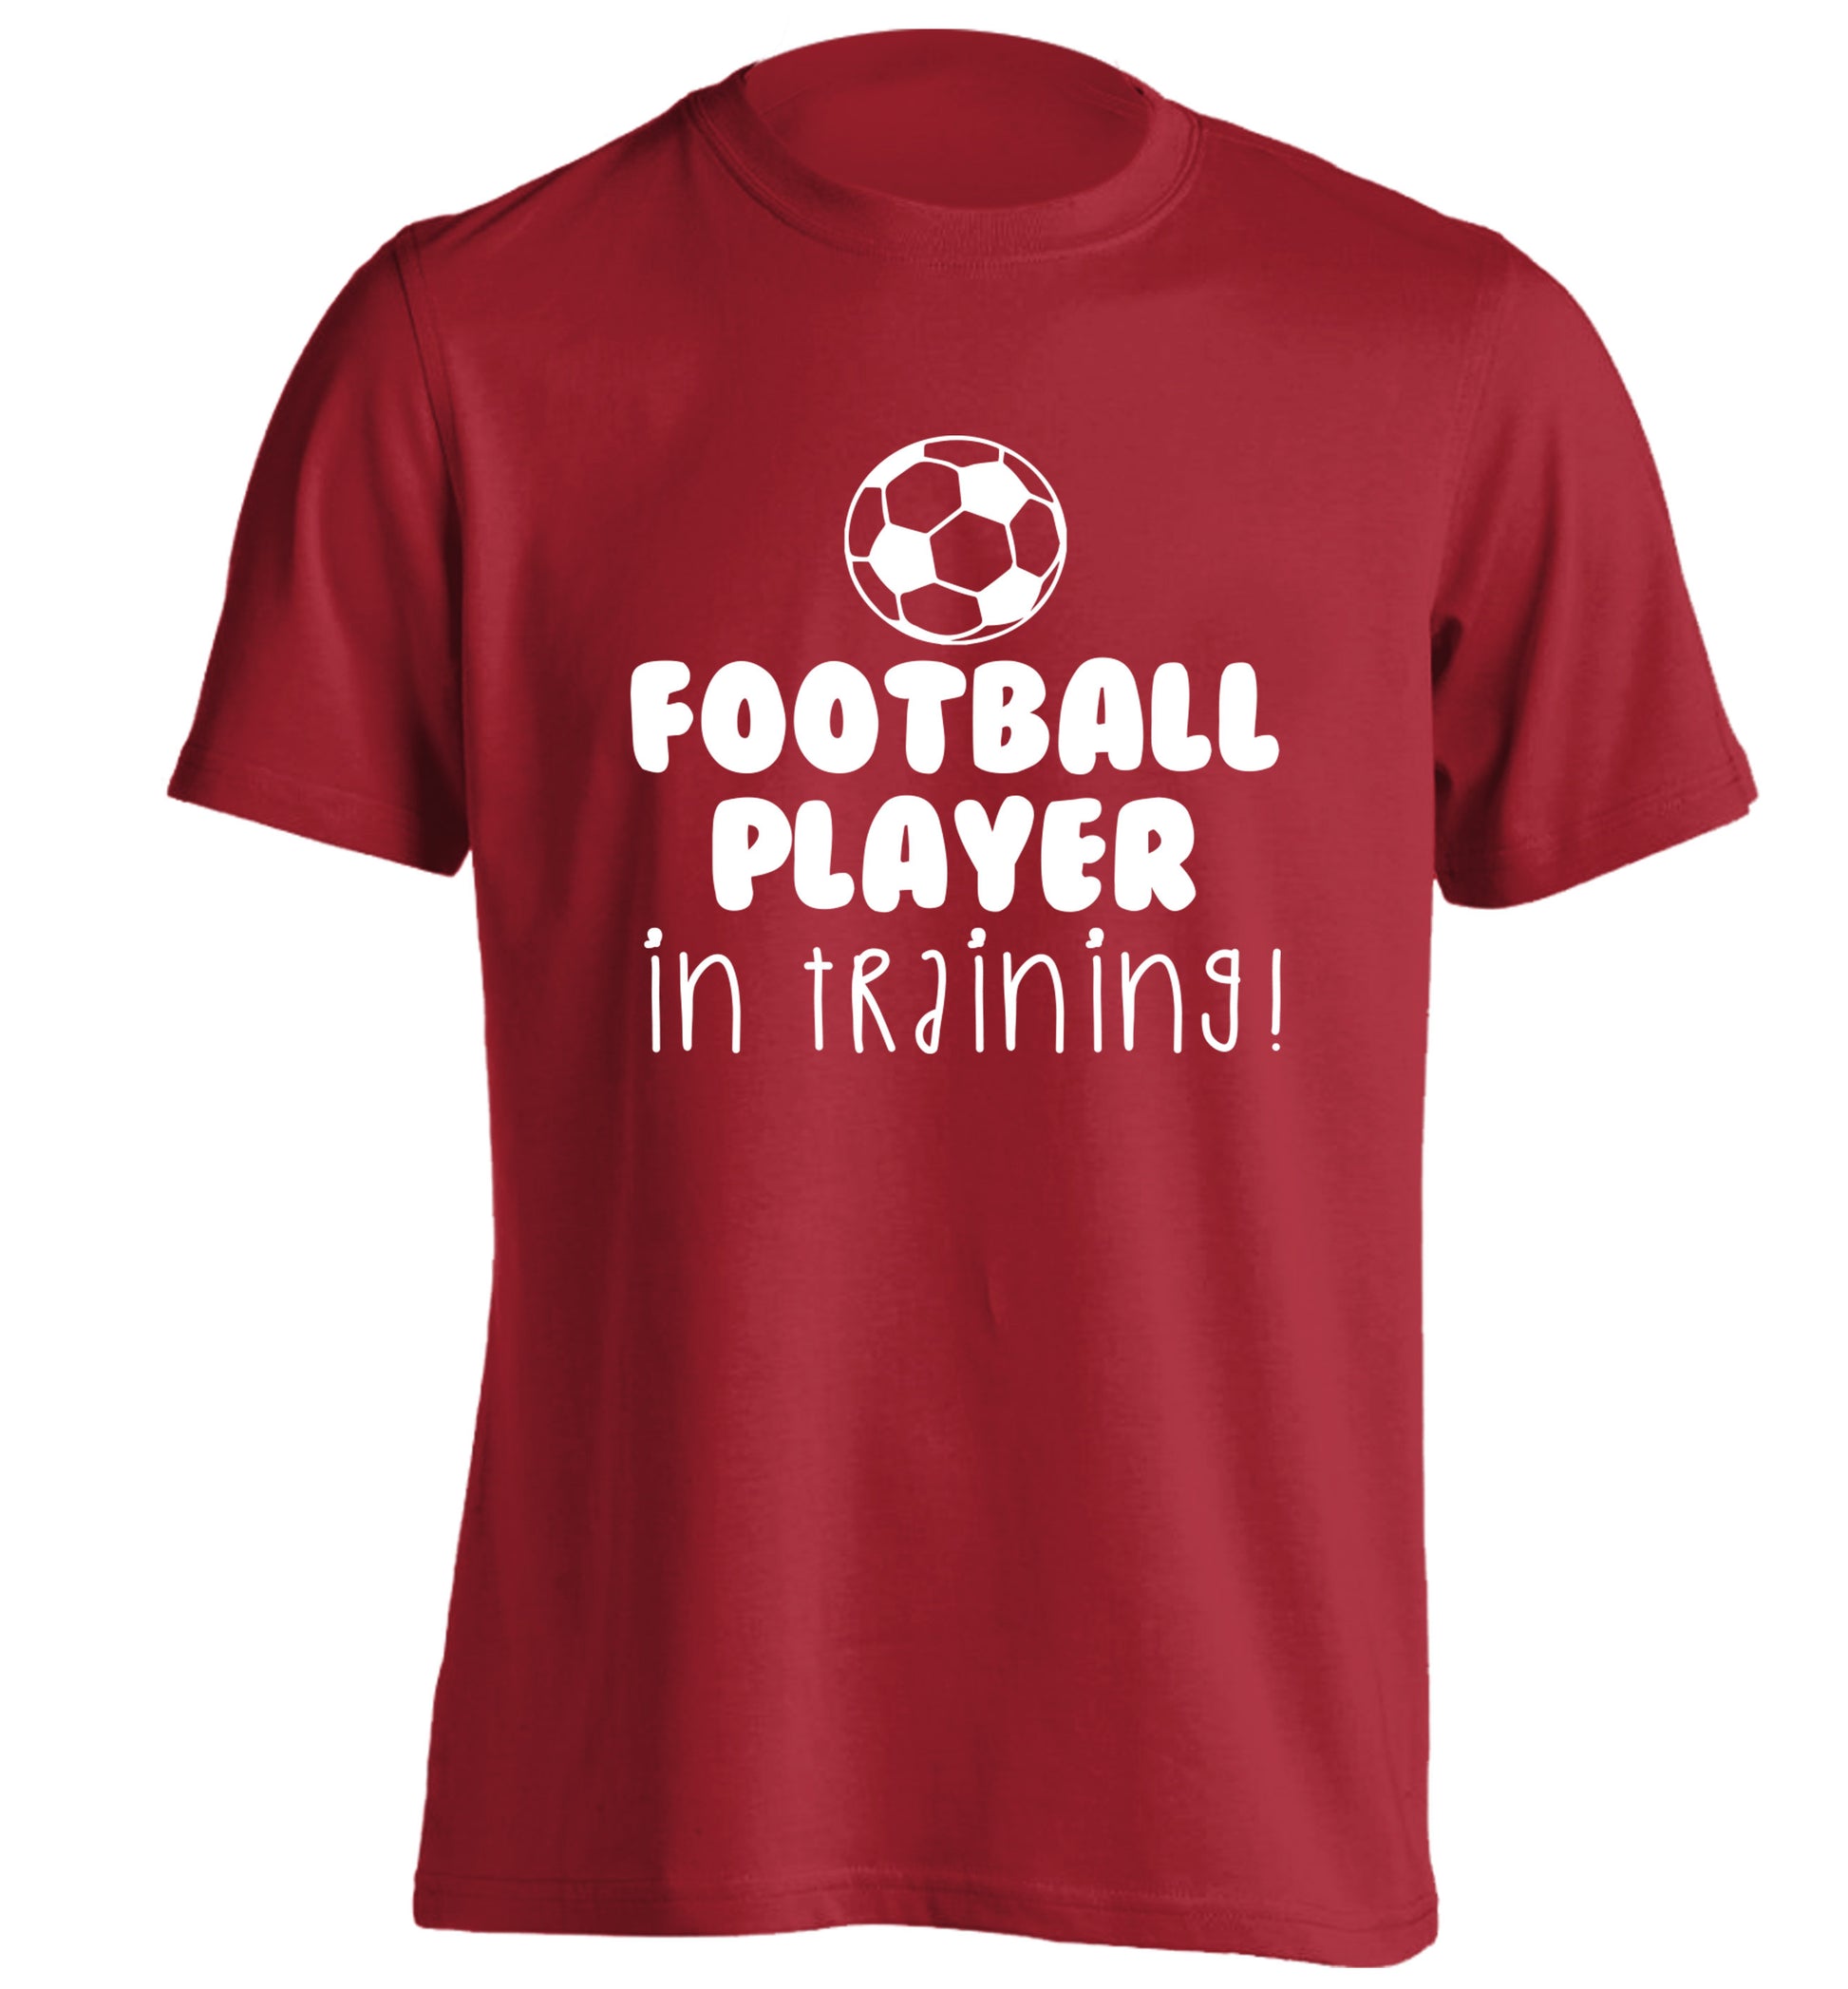 Football player in training adults unisex red Tshirt 2XL